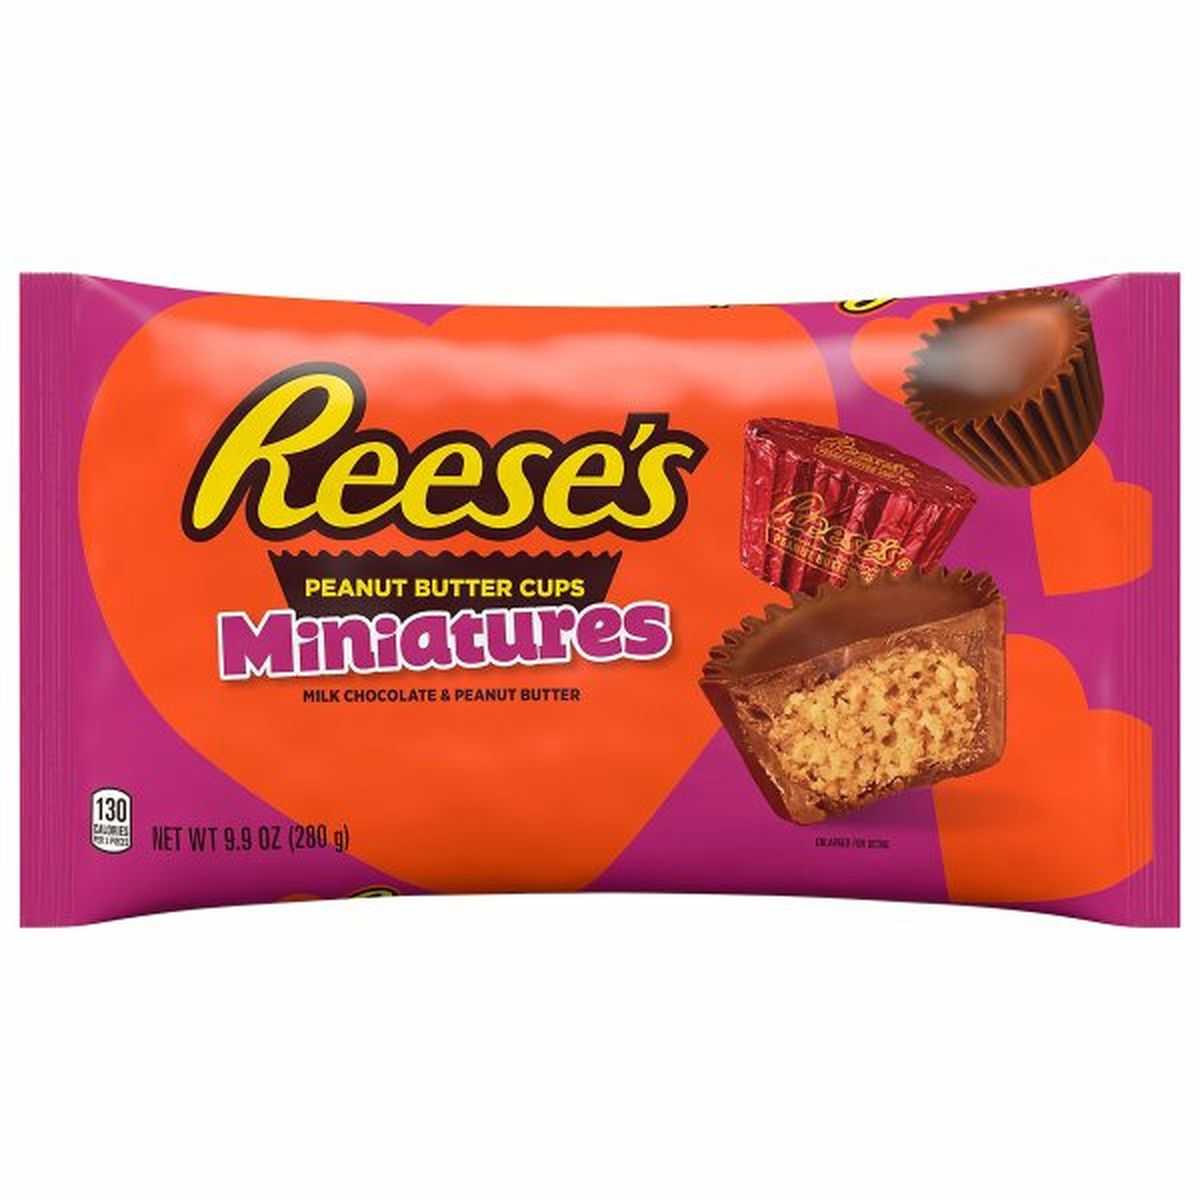 Calories in Reese's Peanut Butter Cups, Miniatures